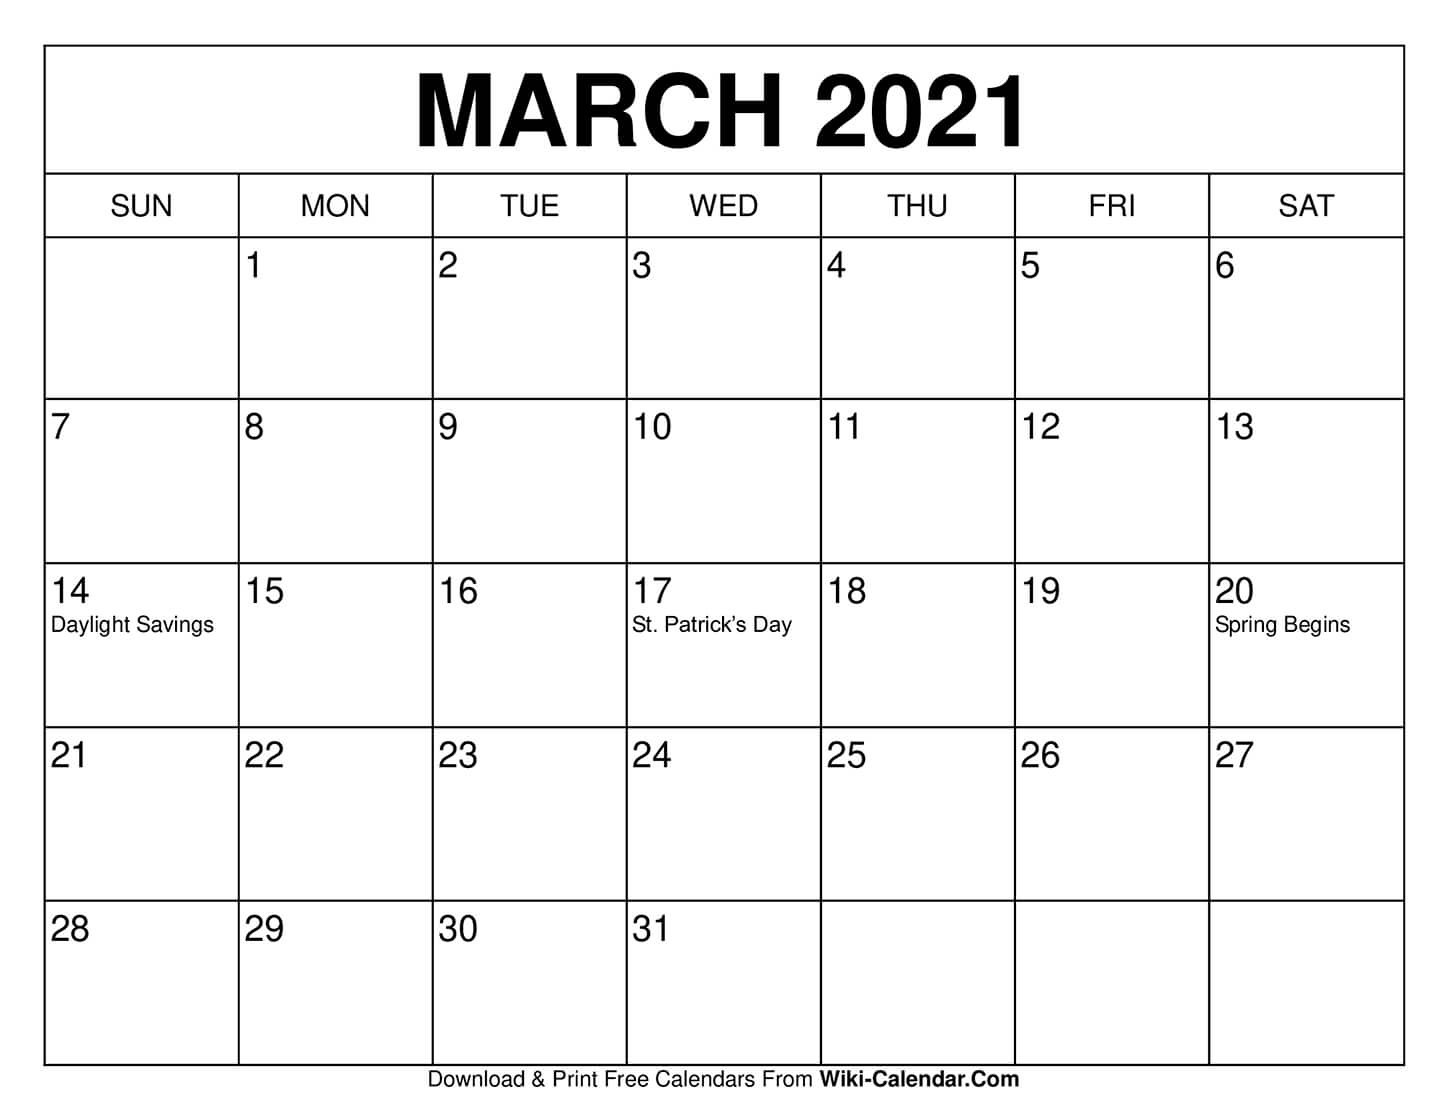 Free Printable March 2021 Calendars-Blank Calendar Pages March 2021